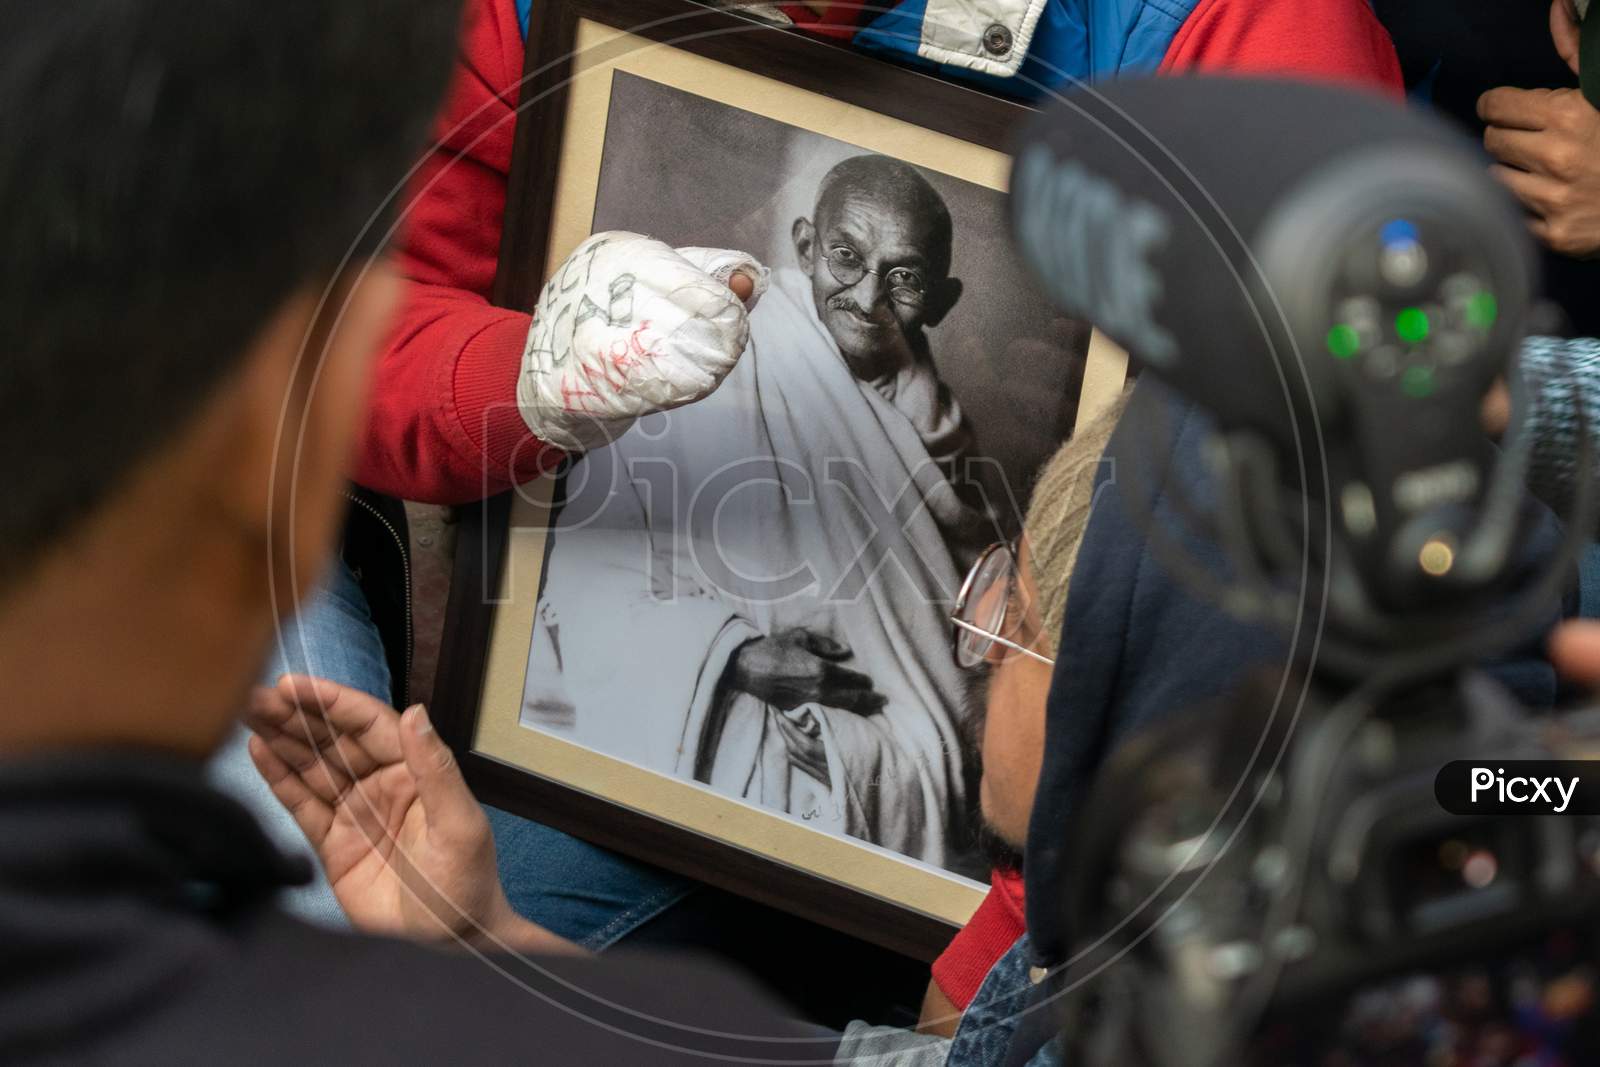 A Student holding picture of Mahatma Gandhi during protest against CAA and NRC outside Jamia Millia Islamia, A Central University in New Delhi